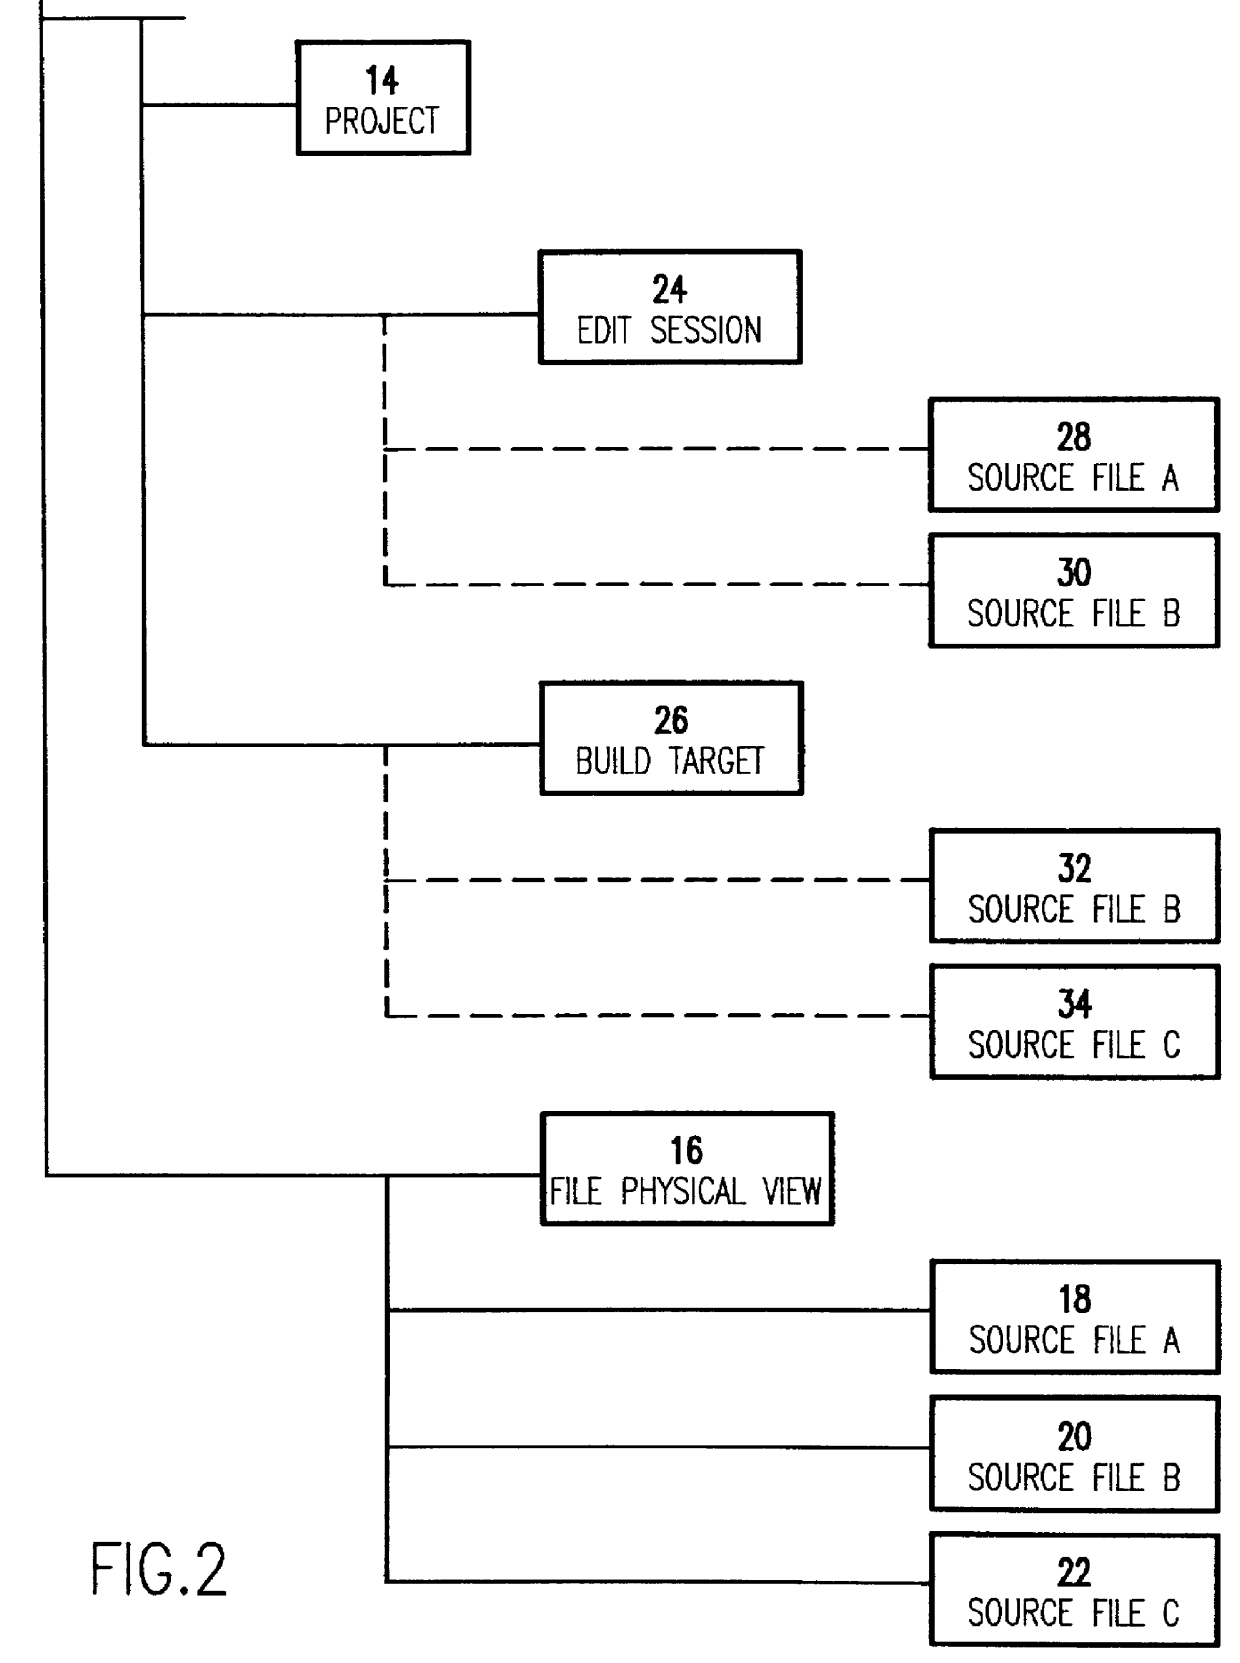 Source code files in a file directory system having multiple hierarchies representing contextual views